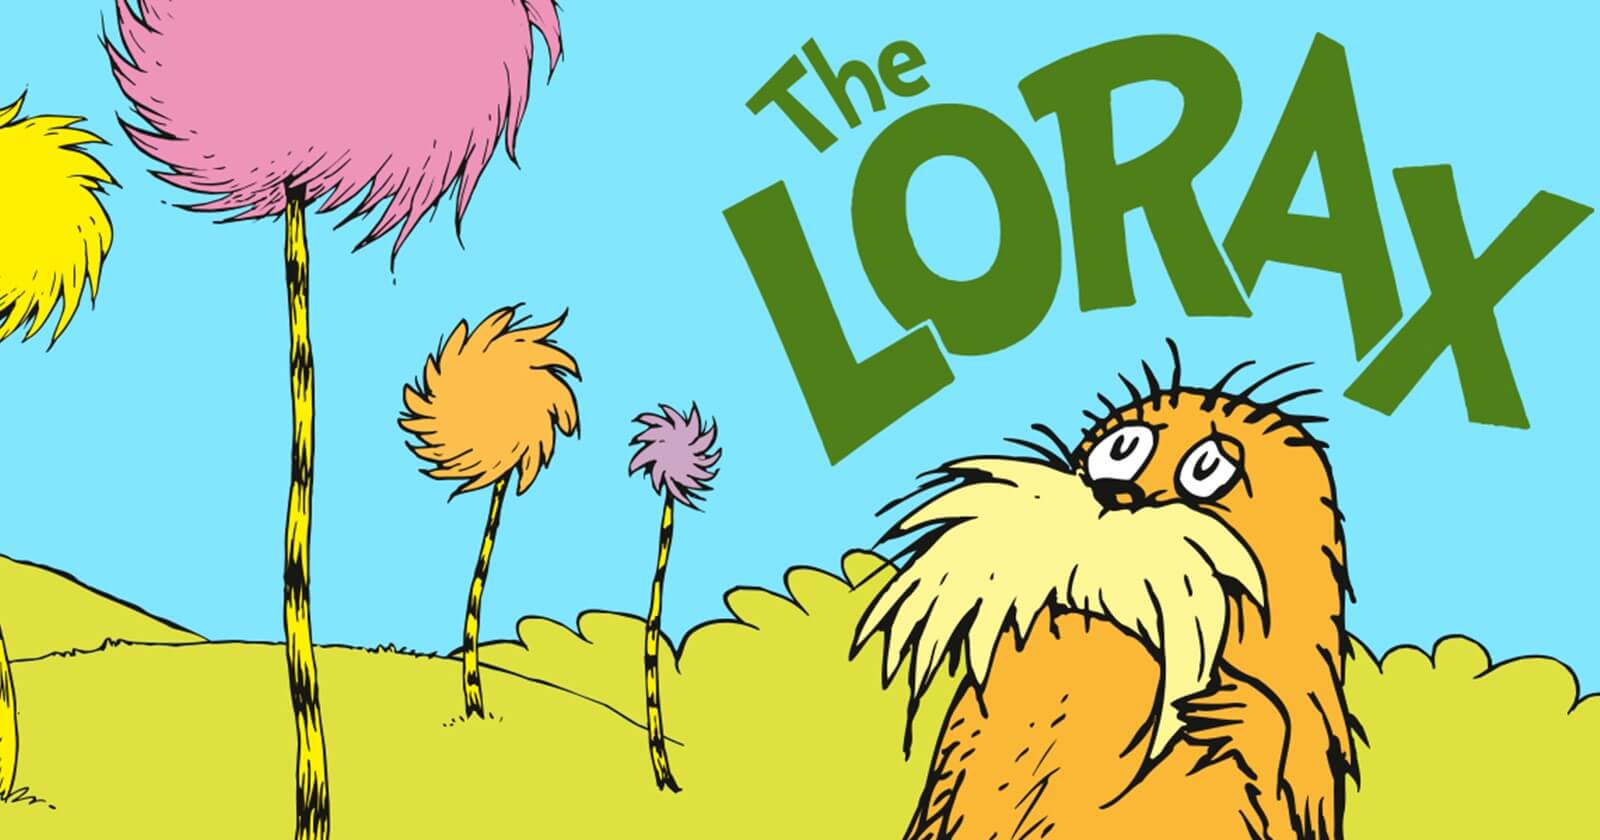 Seuss Enterprises Celebrates The 50th Anniversary Of The Lorax With a Robust Licensing Program and Sustainable Brand Partnerships image